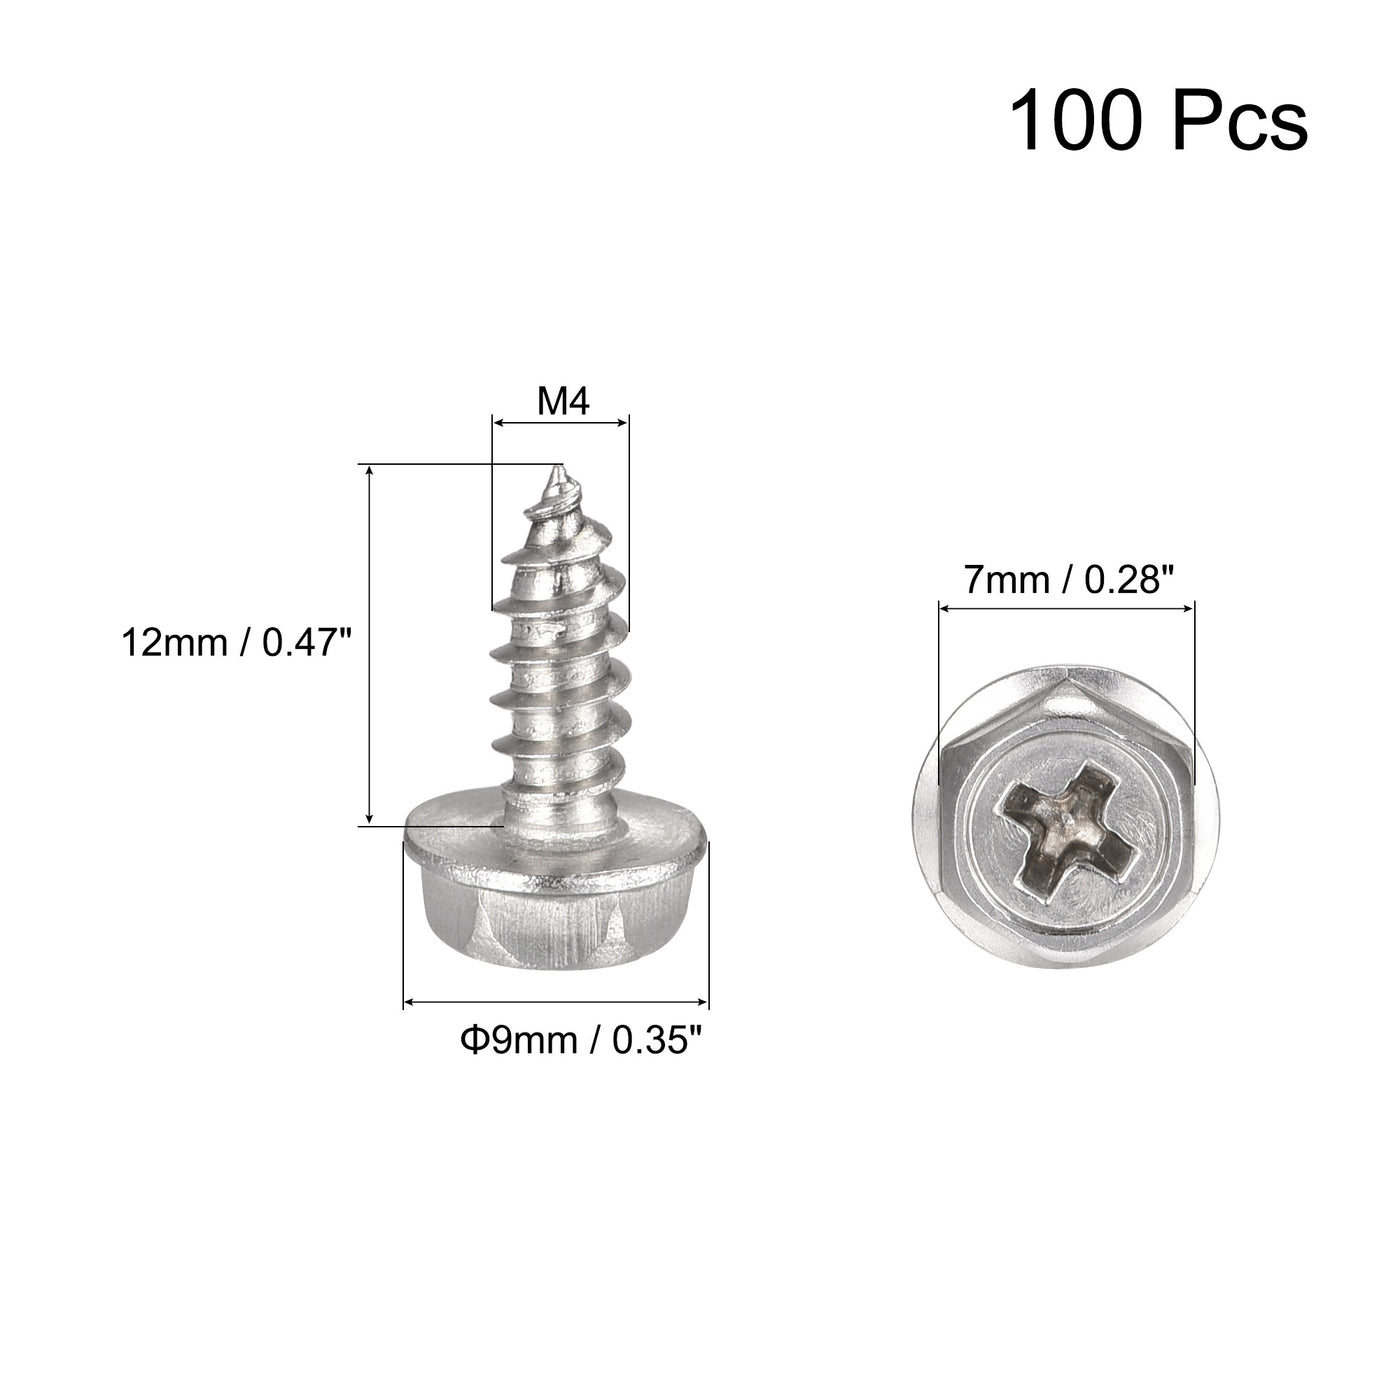 uxcell Uxcell Phillips Hex Washer Self Tapping Screws, M4 x 12mm 304 Stainless Steel Hex Flange Sheet Metal Screw 100pcs